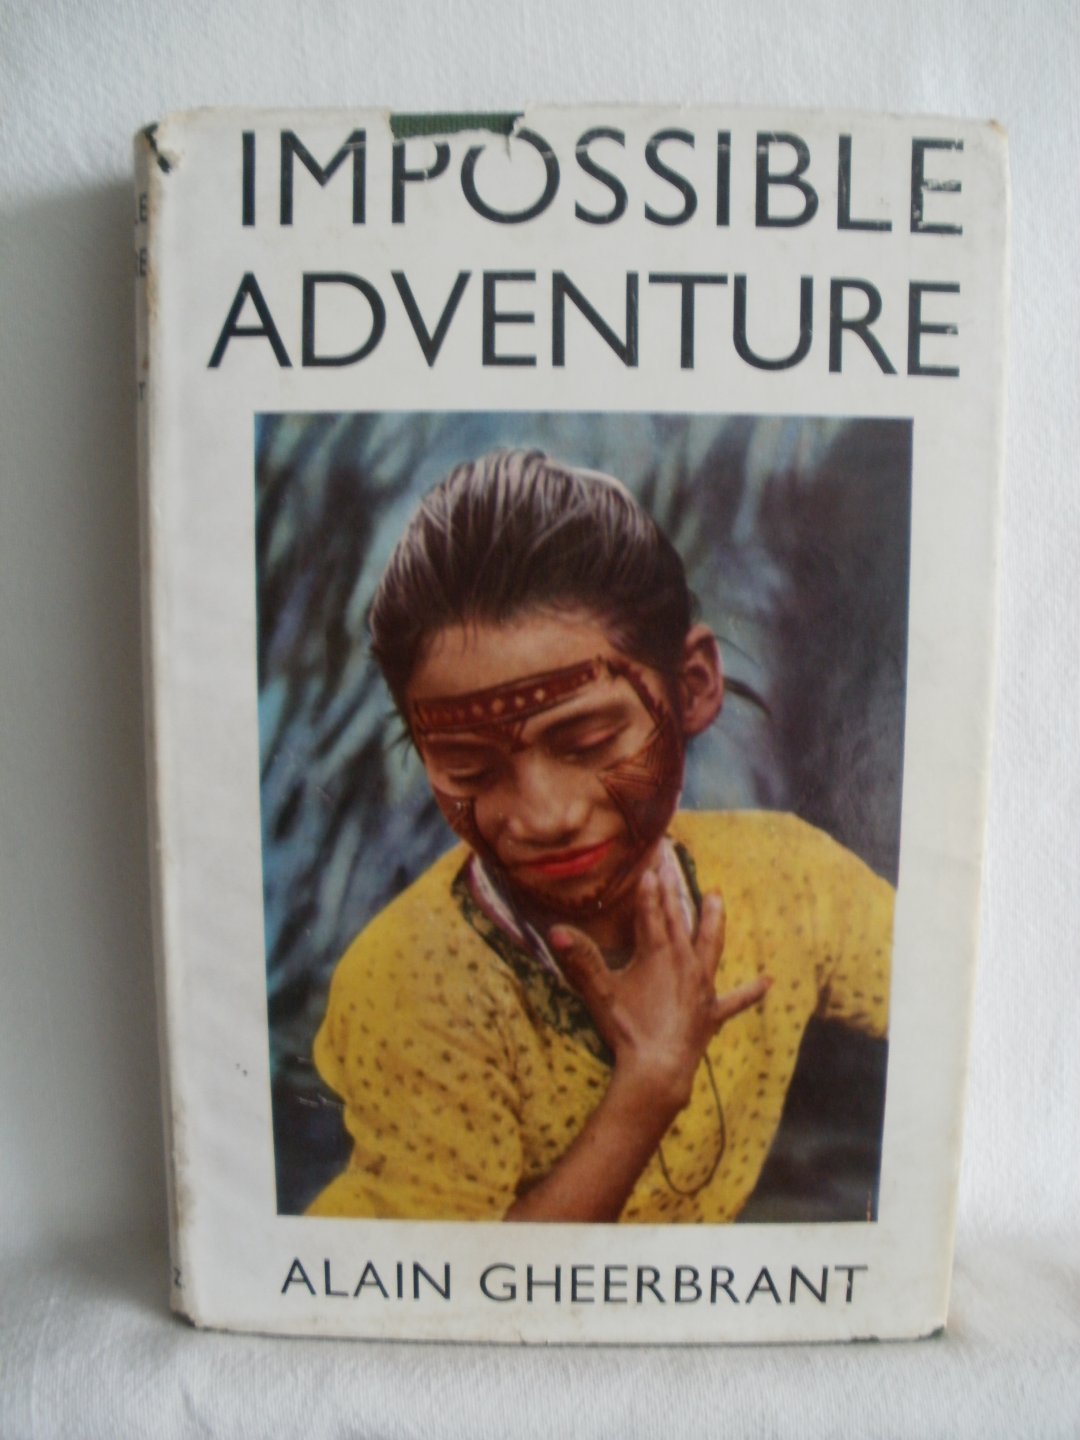 Gheerbrandt, Alain; Fitzgerald, Edward (translation) - The Impossible Adventure. Journey to the Far Amazon.